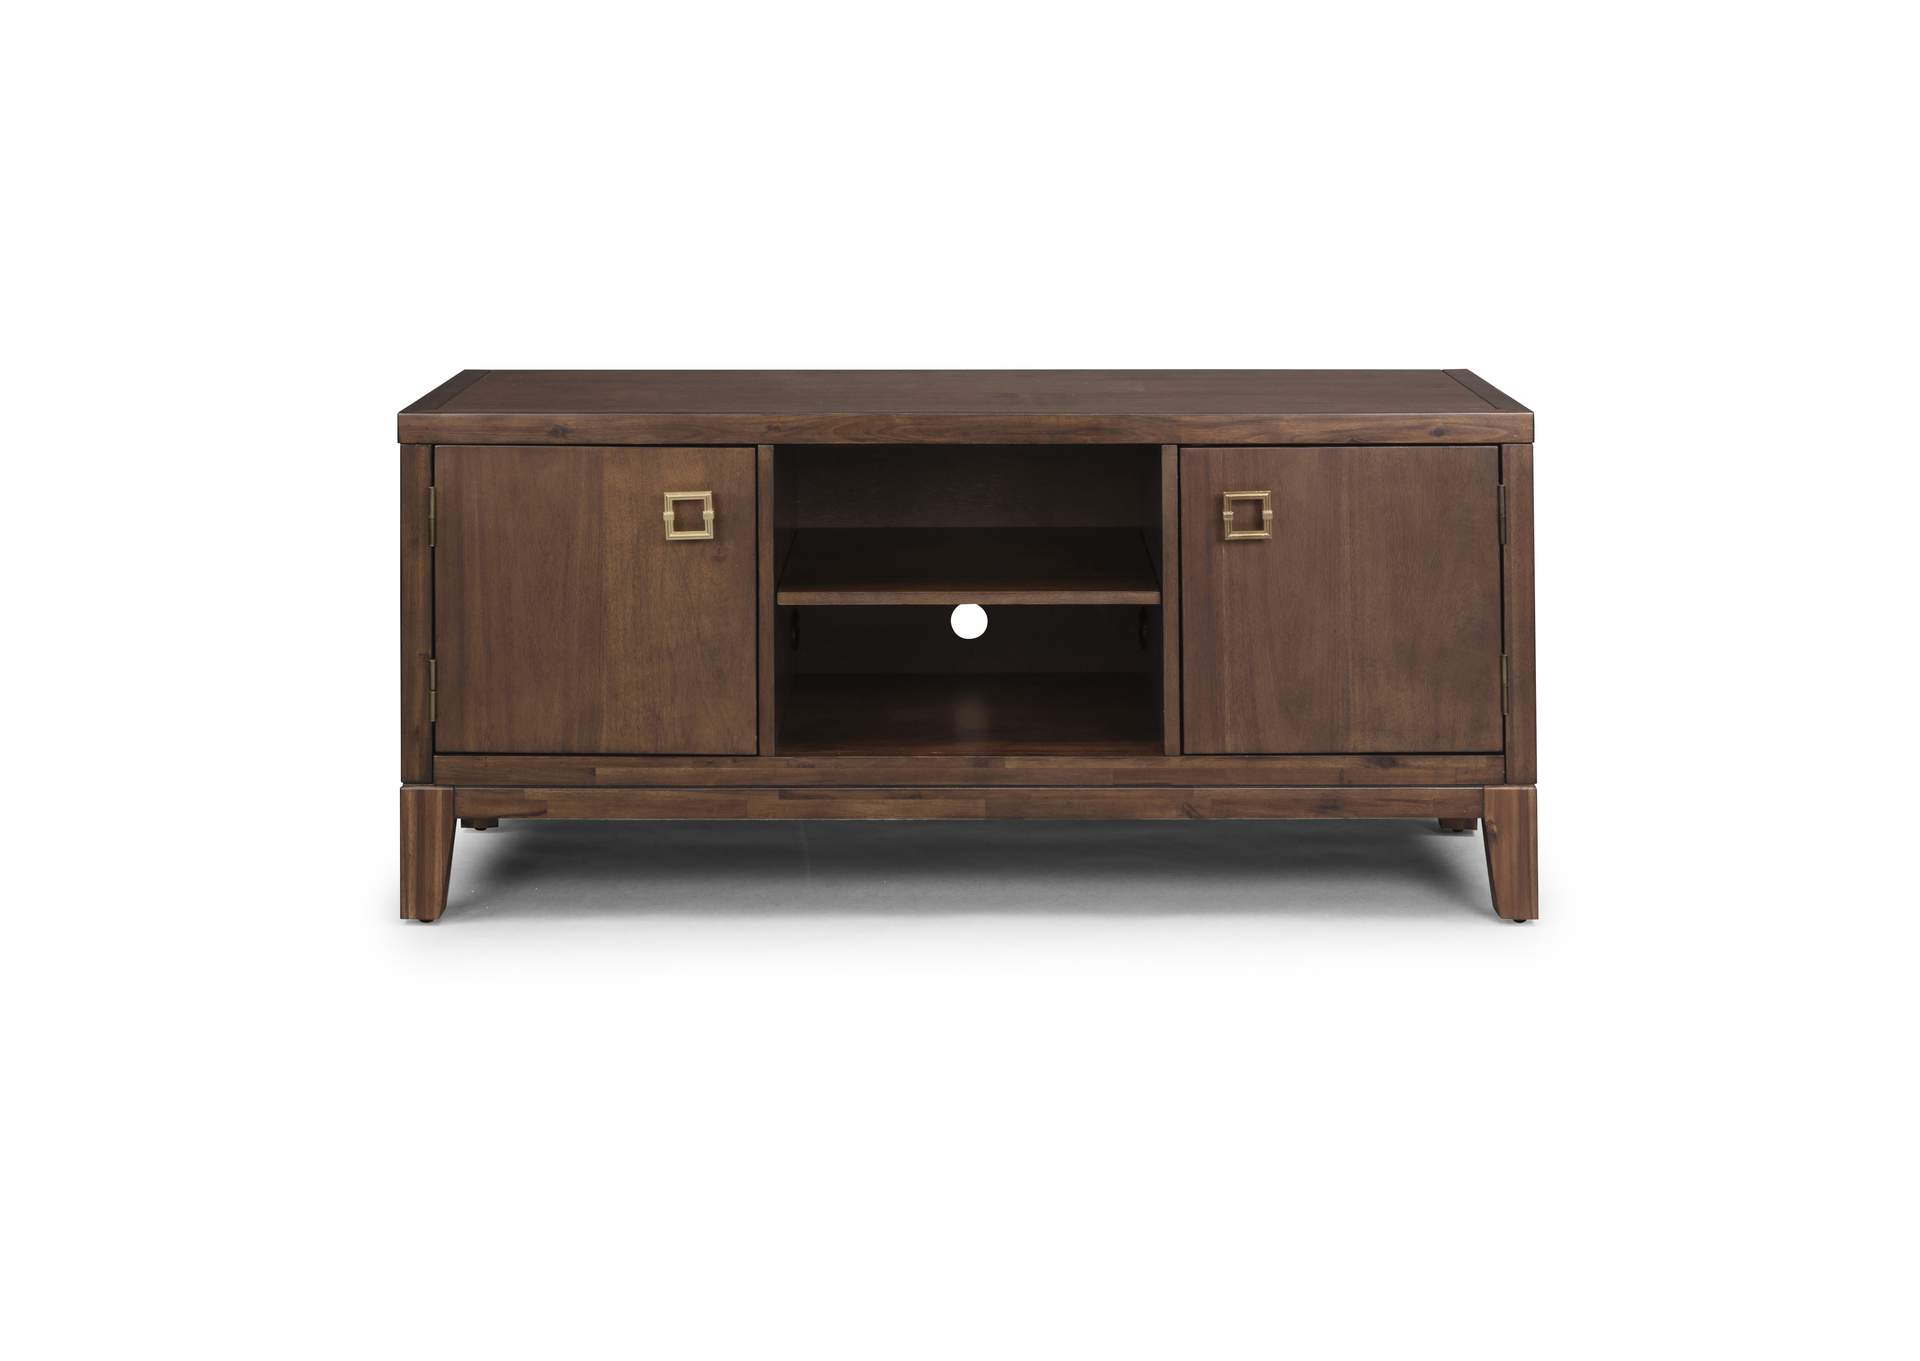 Bungalow Brown Entertainment Center,Homestyles